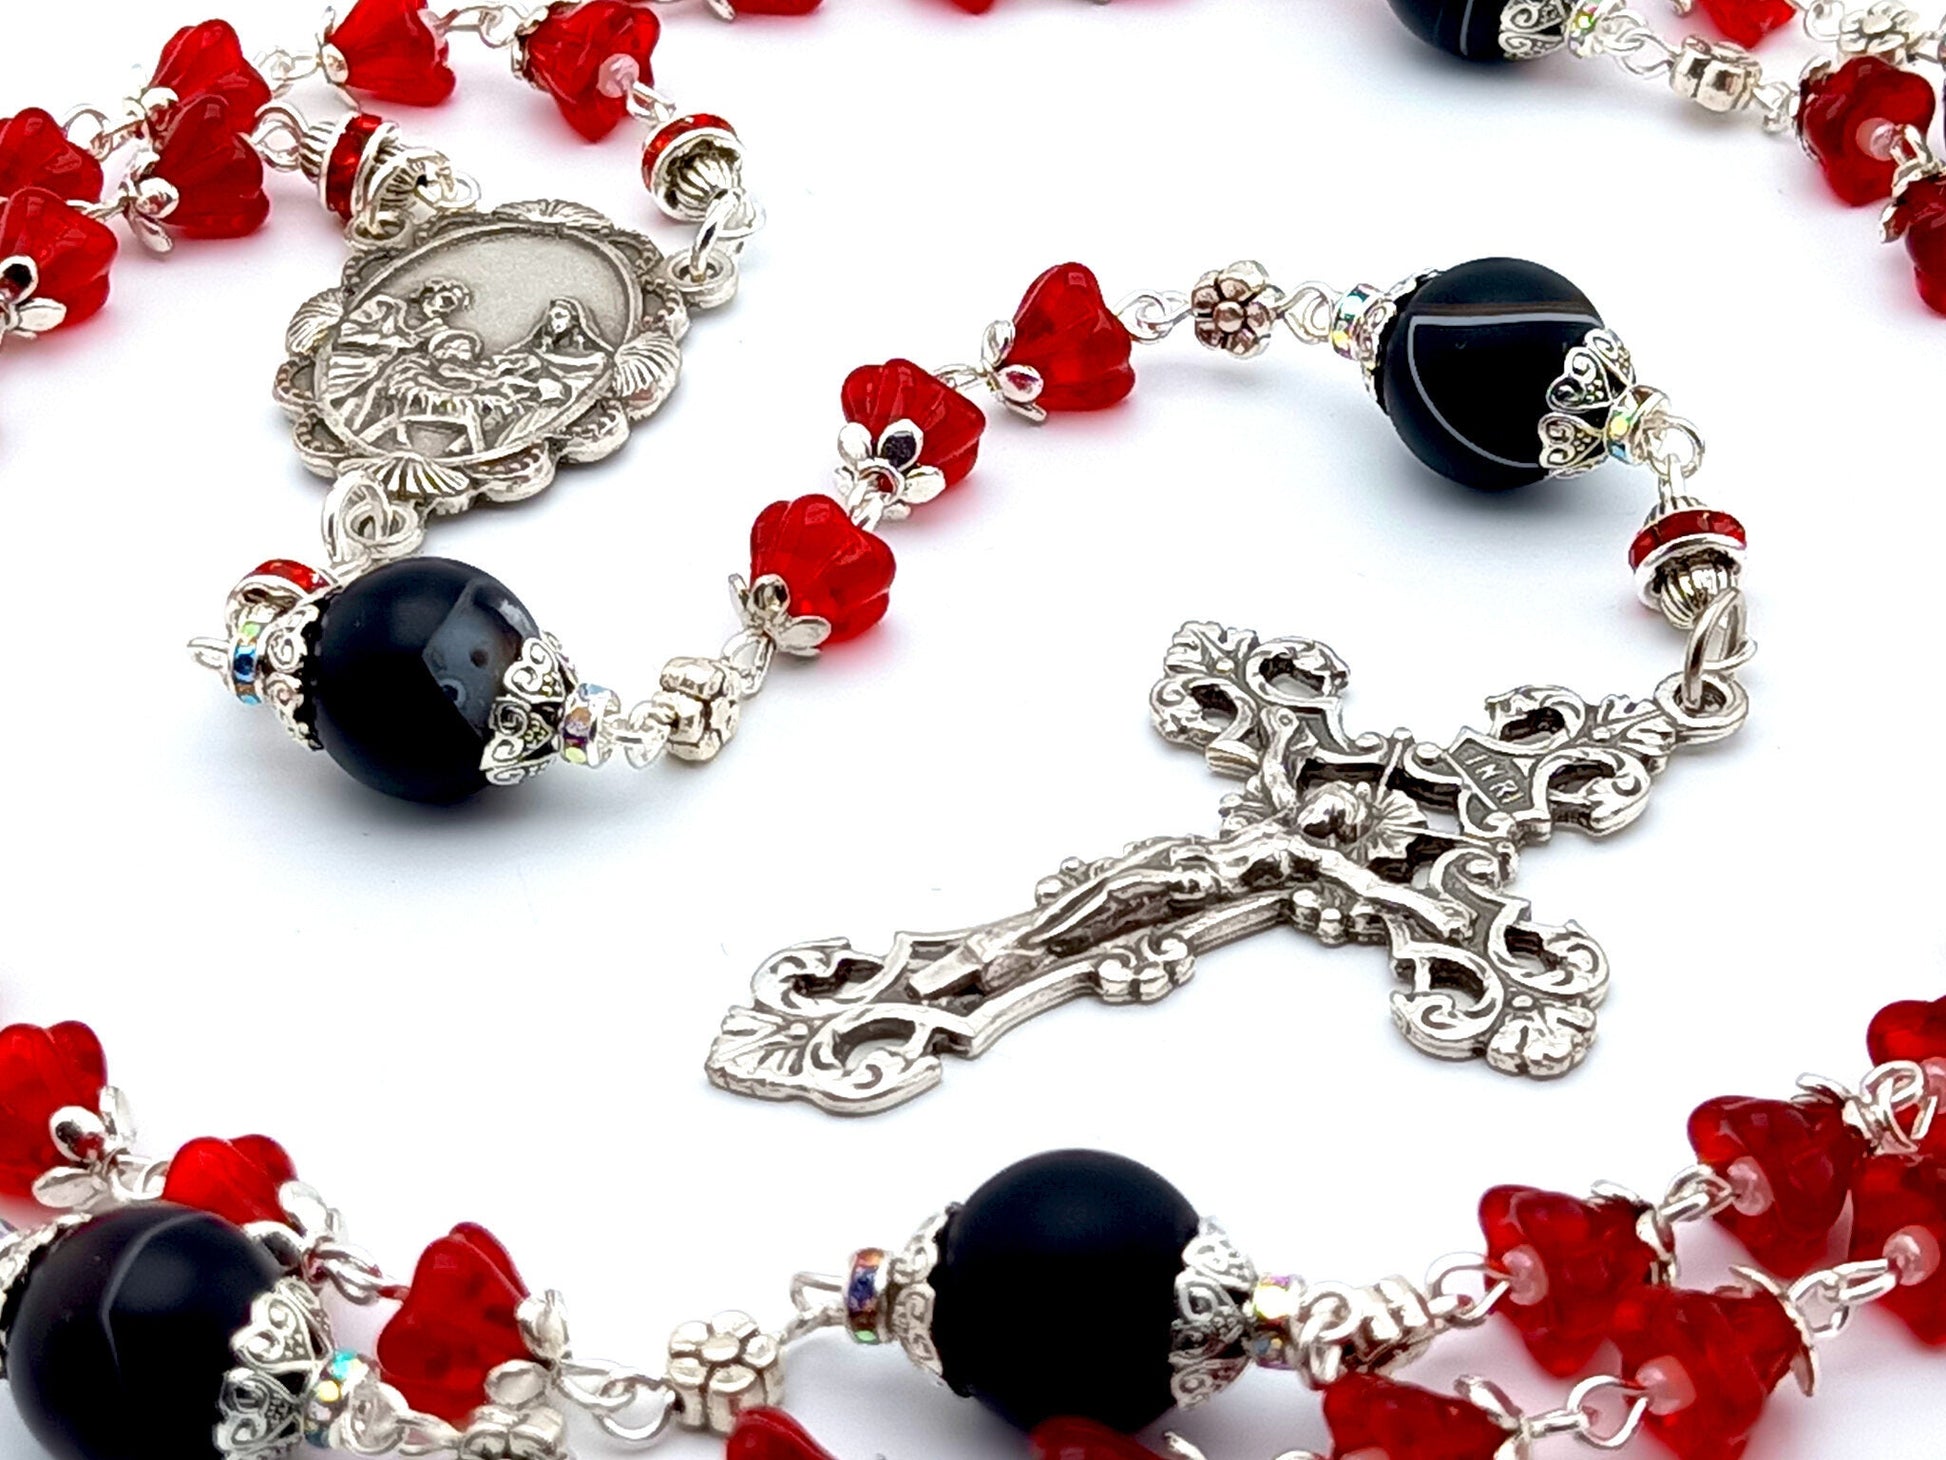 The Nativity unique rosary beads with red tulip glass and onyx beads, silver filigree crucifix and centre medal.